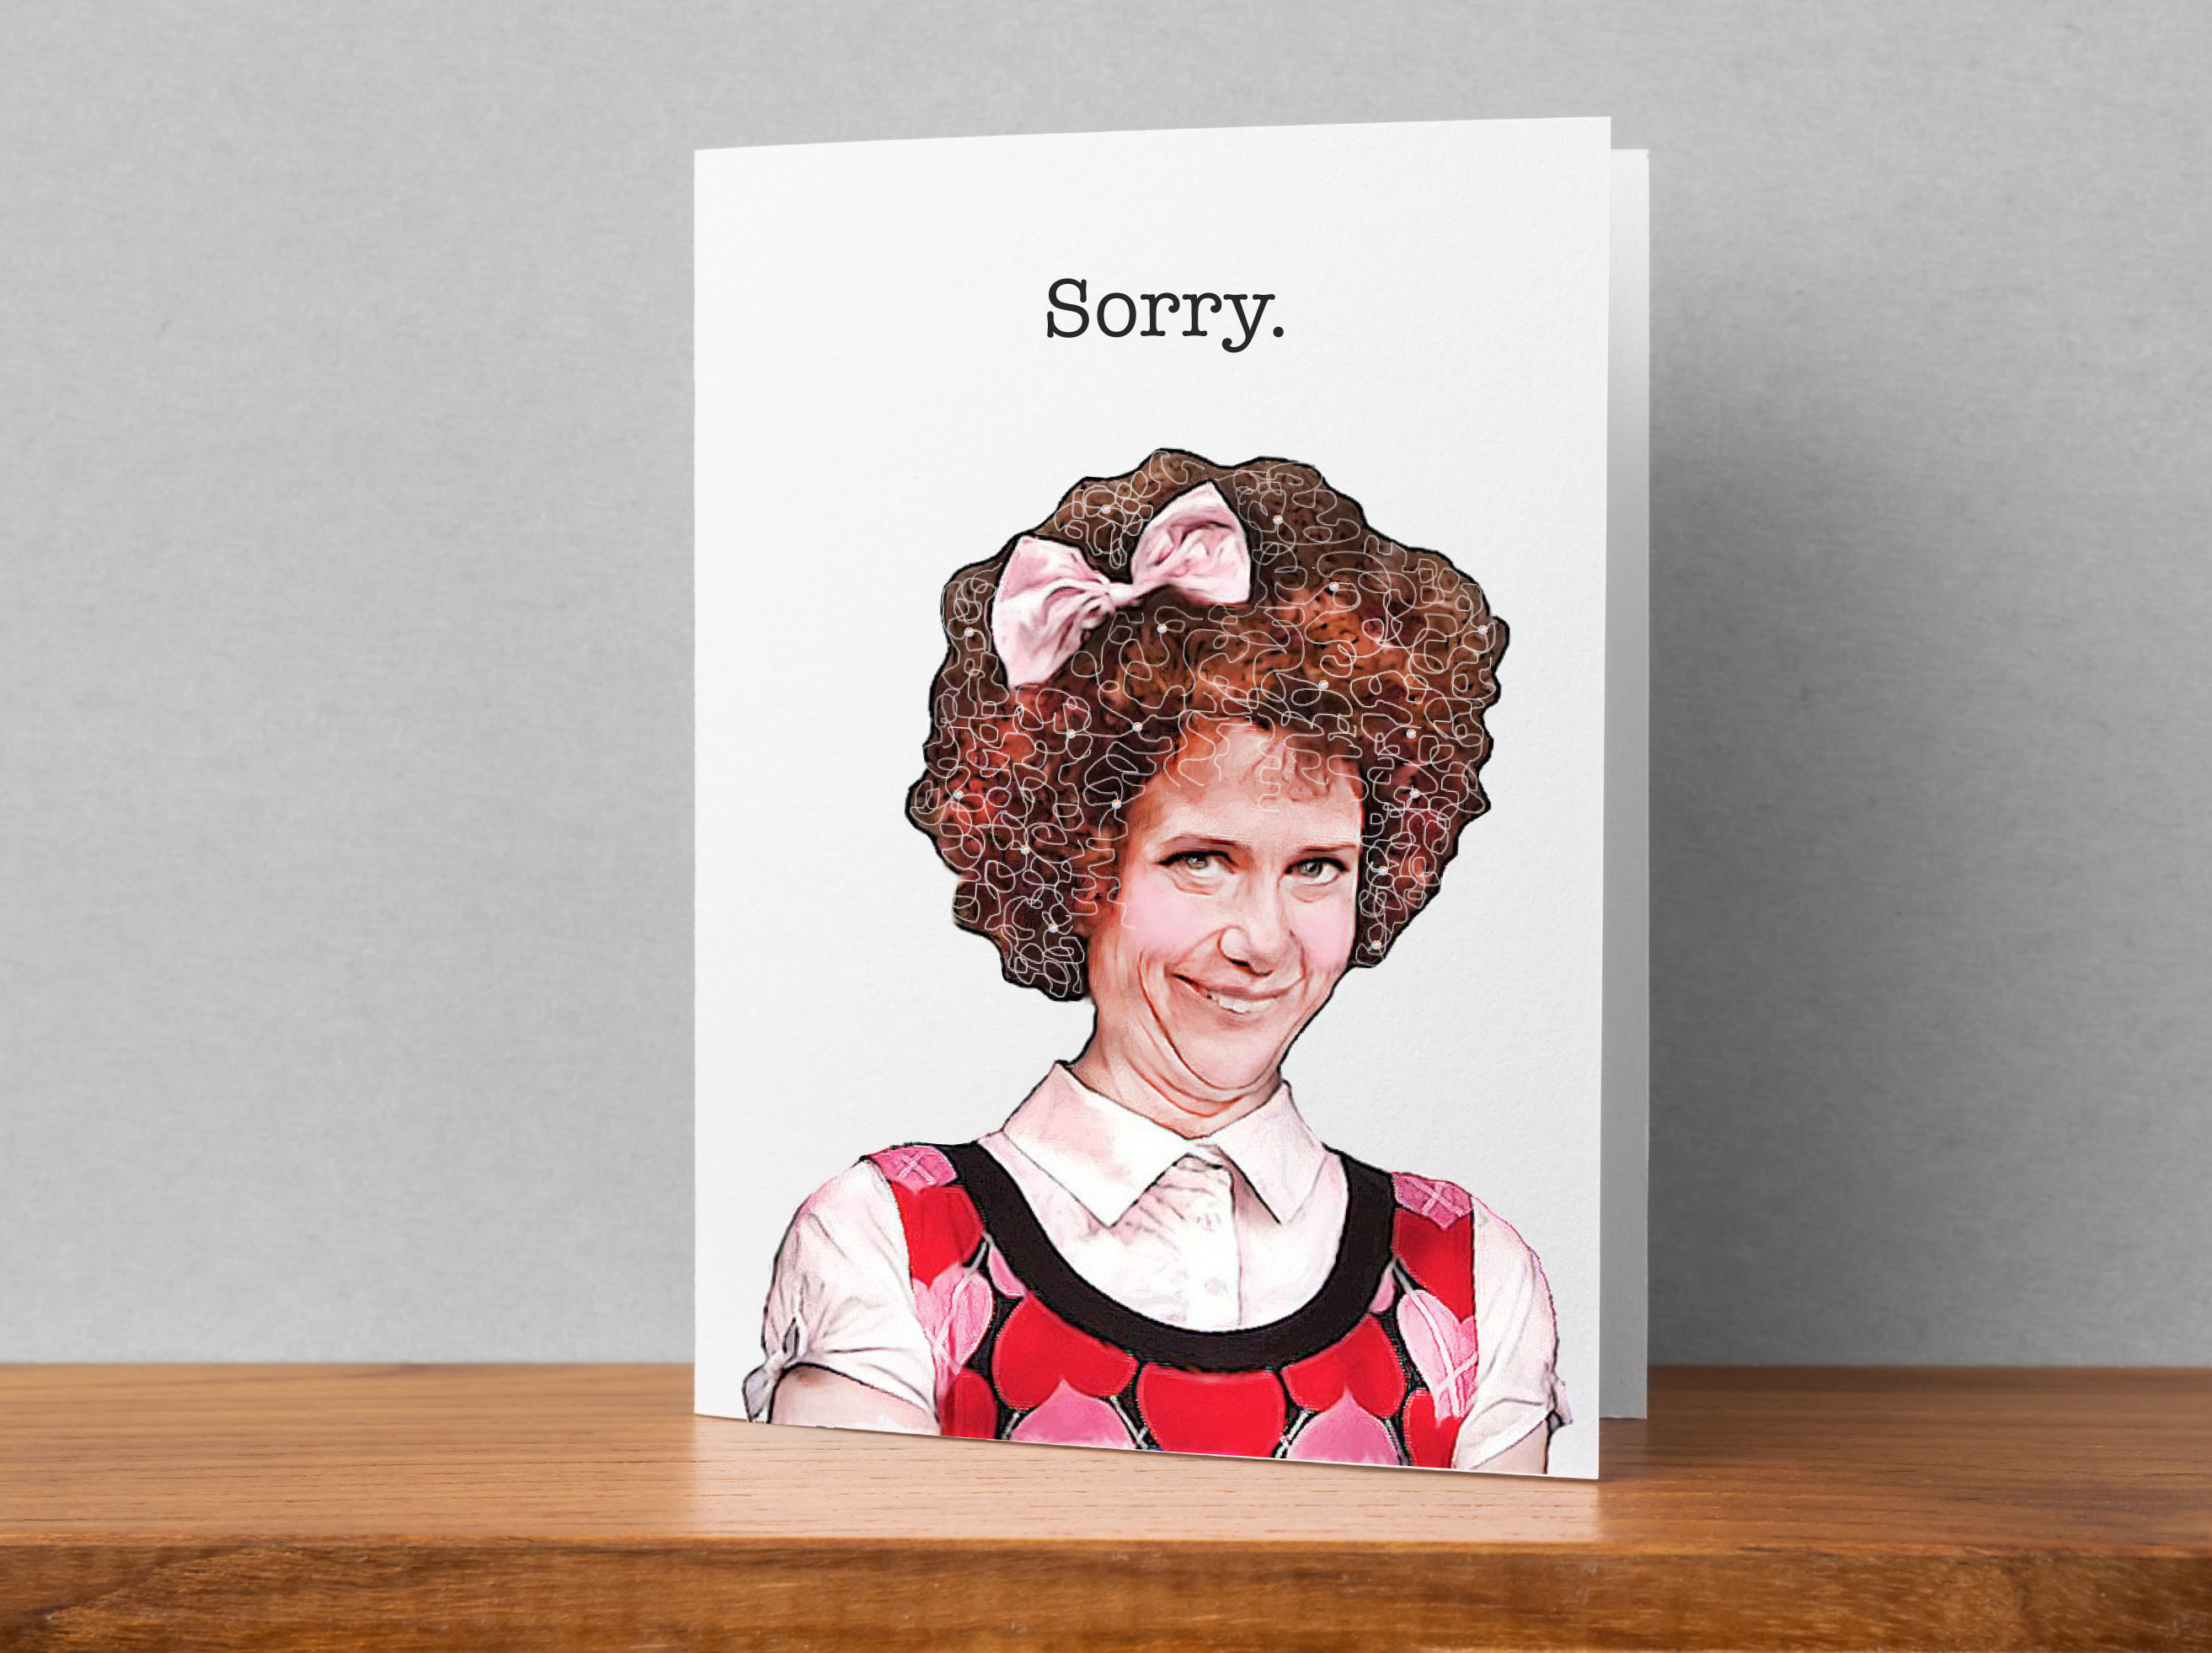 Gilly Did It and She's Sorry Original Greeting Card is Handmade in